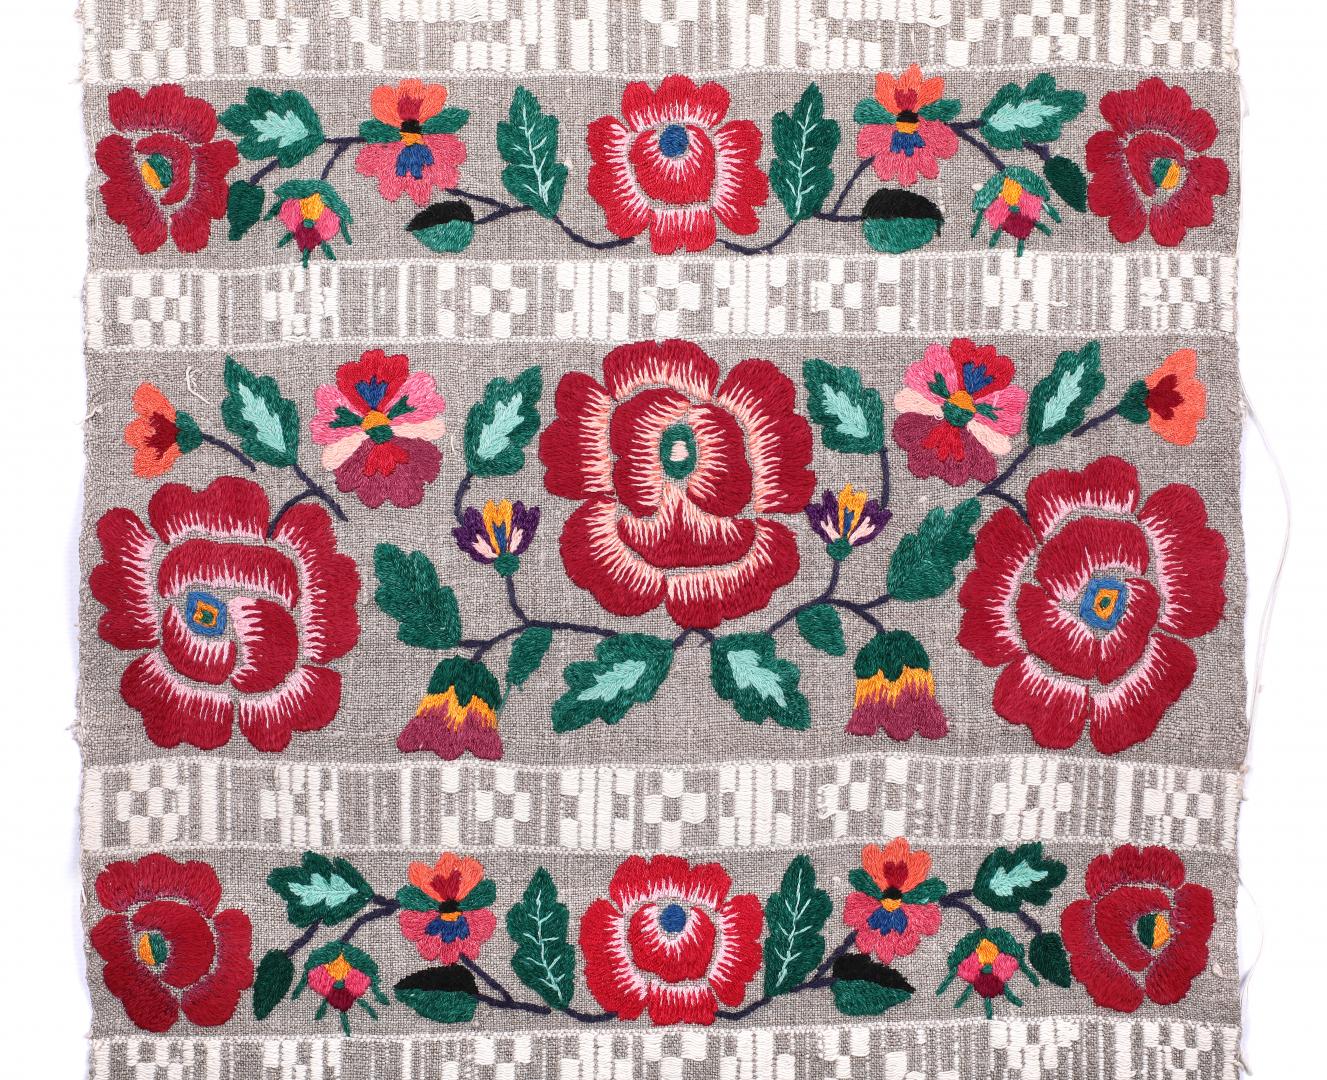 Woven and embroidered rushnyk (towel)